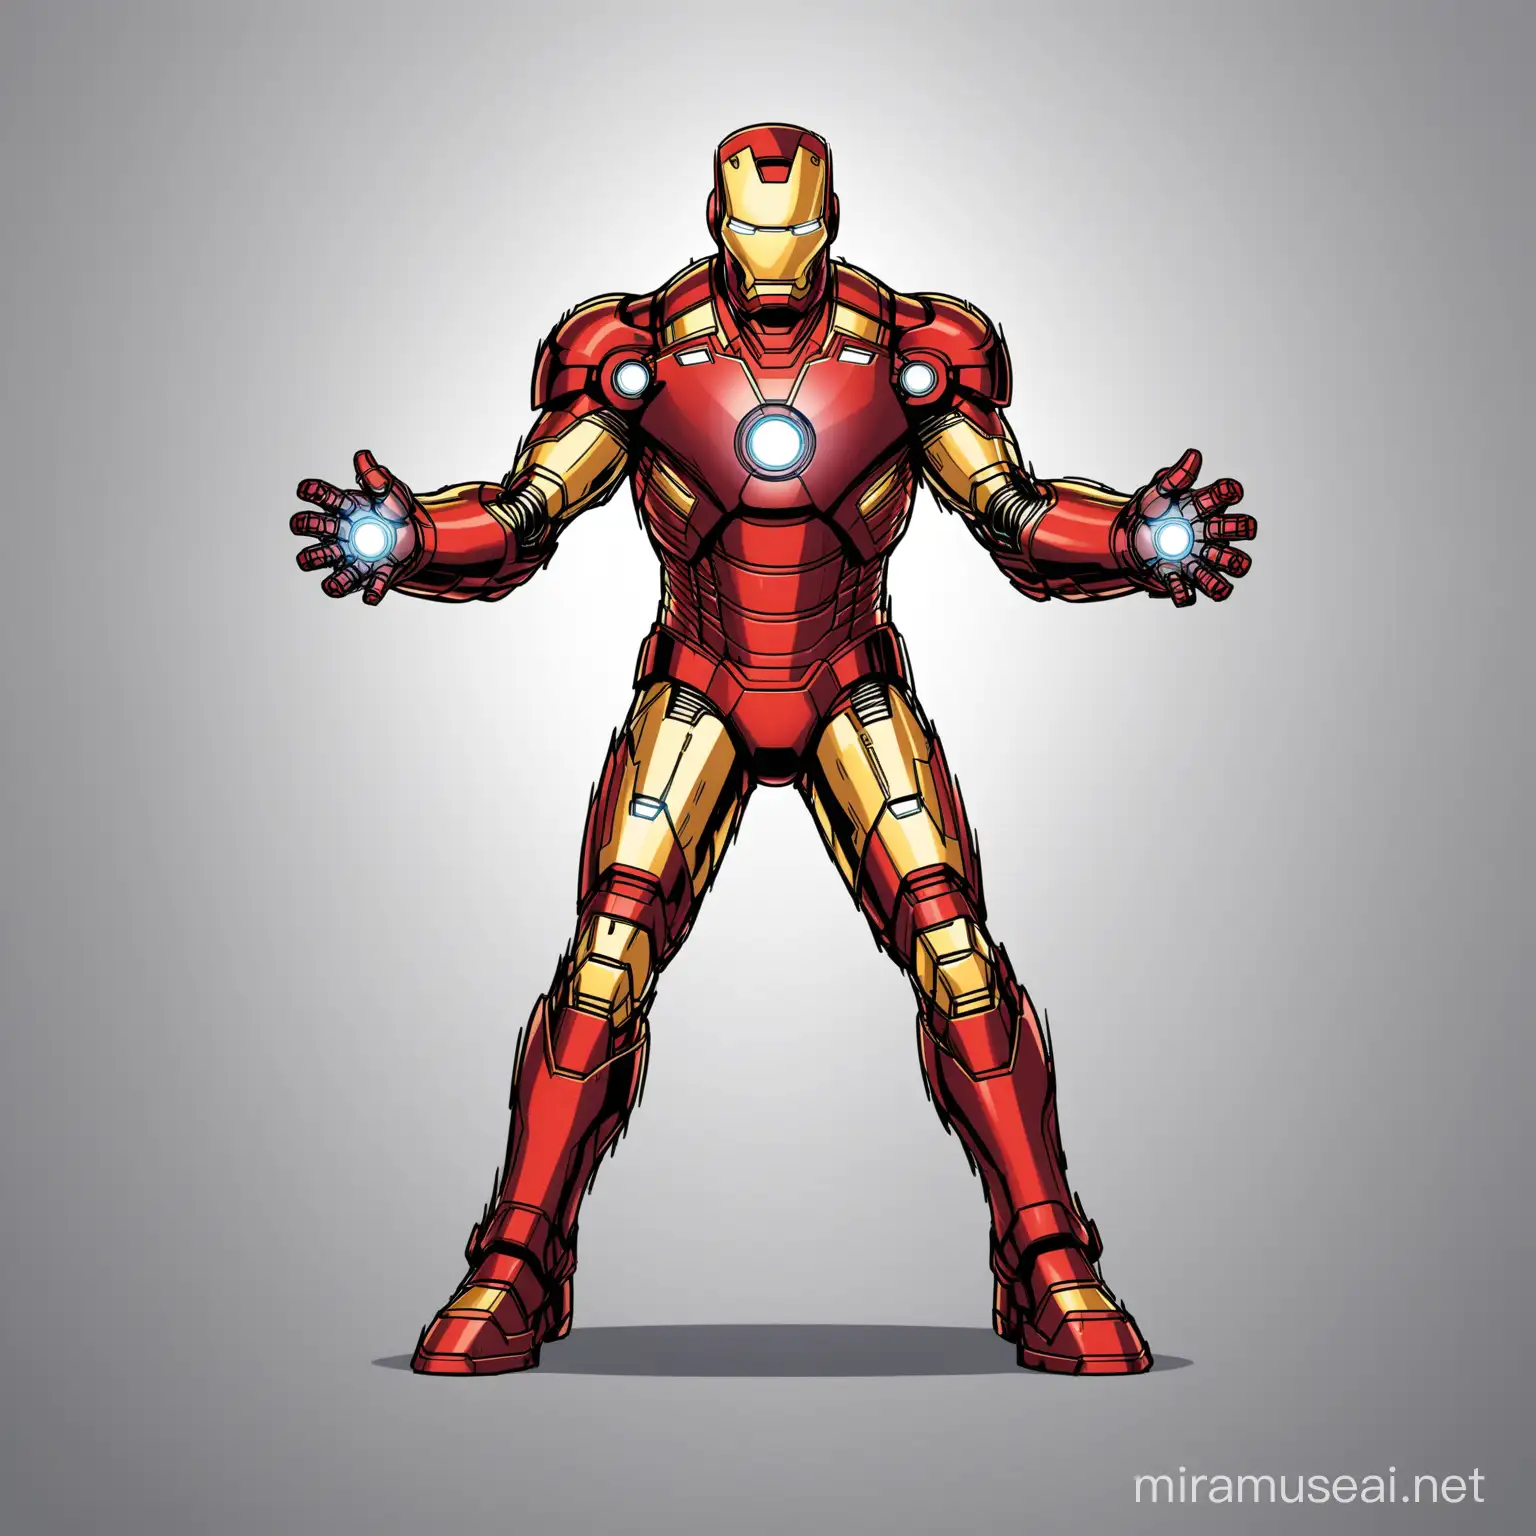 create style comics in full front and standing  Iron Man superhero icon marvel.